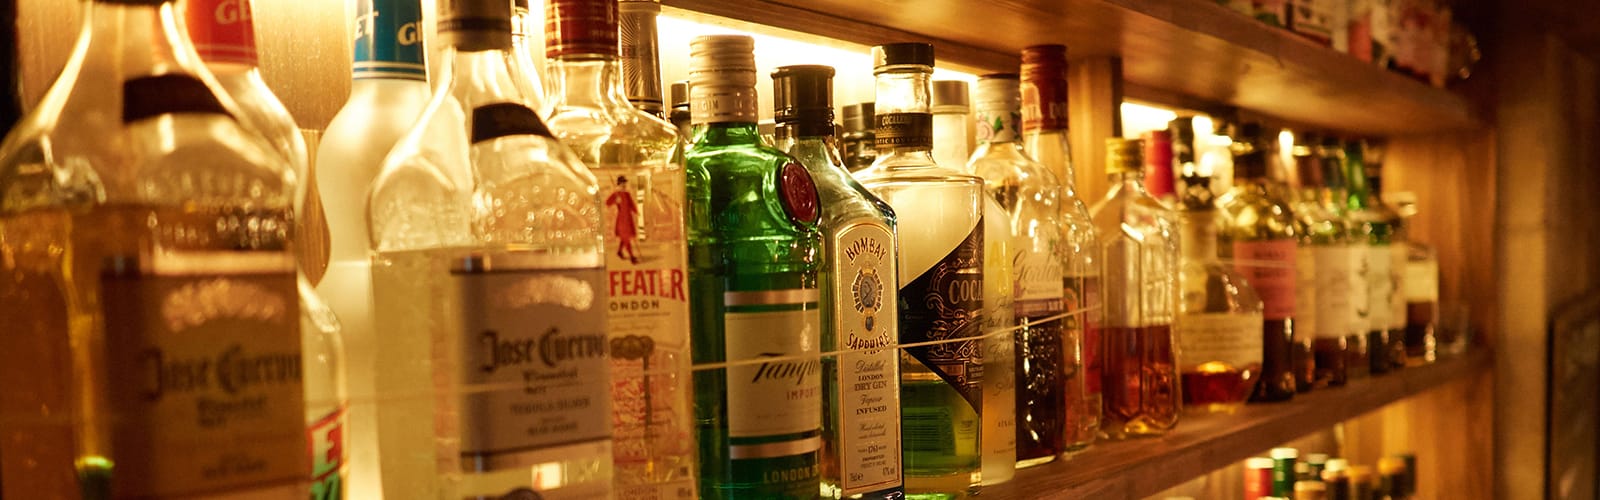 Shelves lined with bottles of various spirits and liqueurs